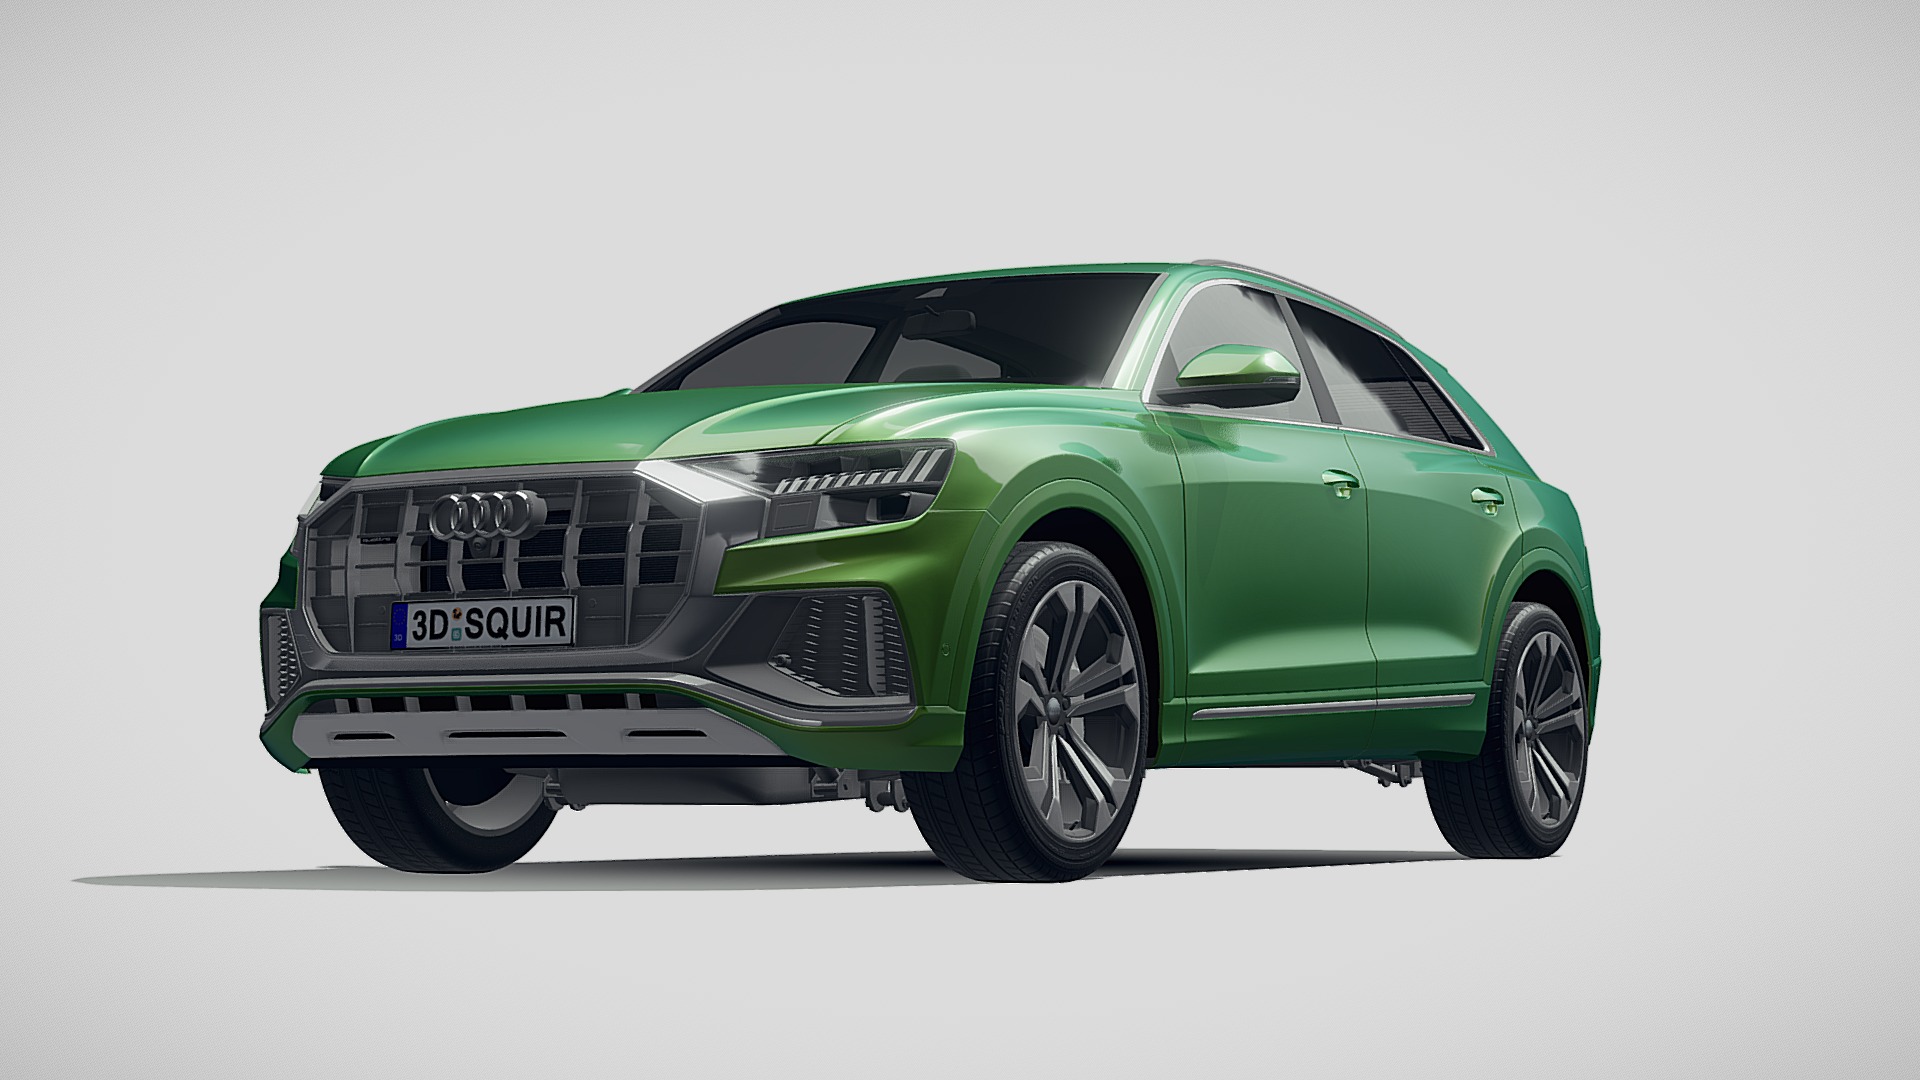 3D model Audi Q8 2019 - This is a 3D model of the Audi Q8 2019. The 3D model is about a green car with a white background.